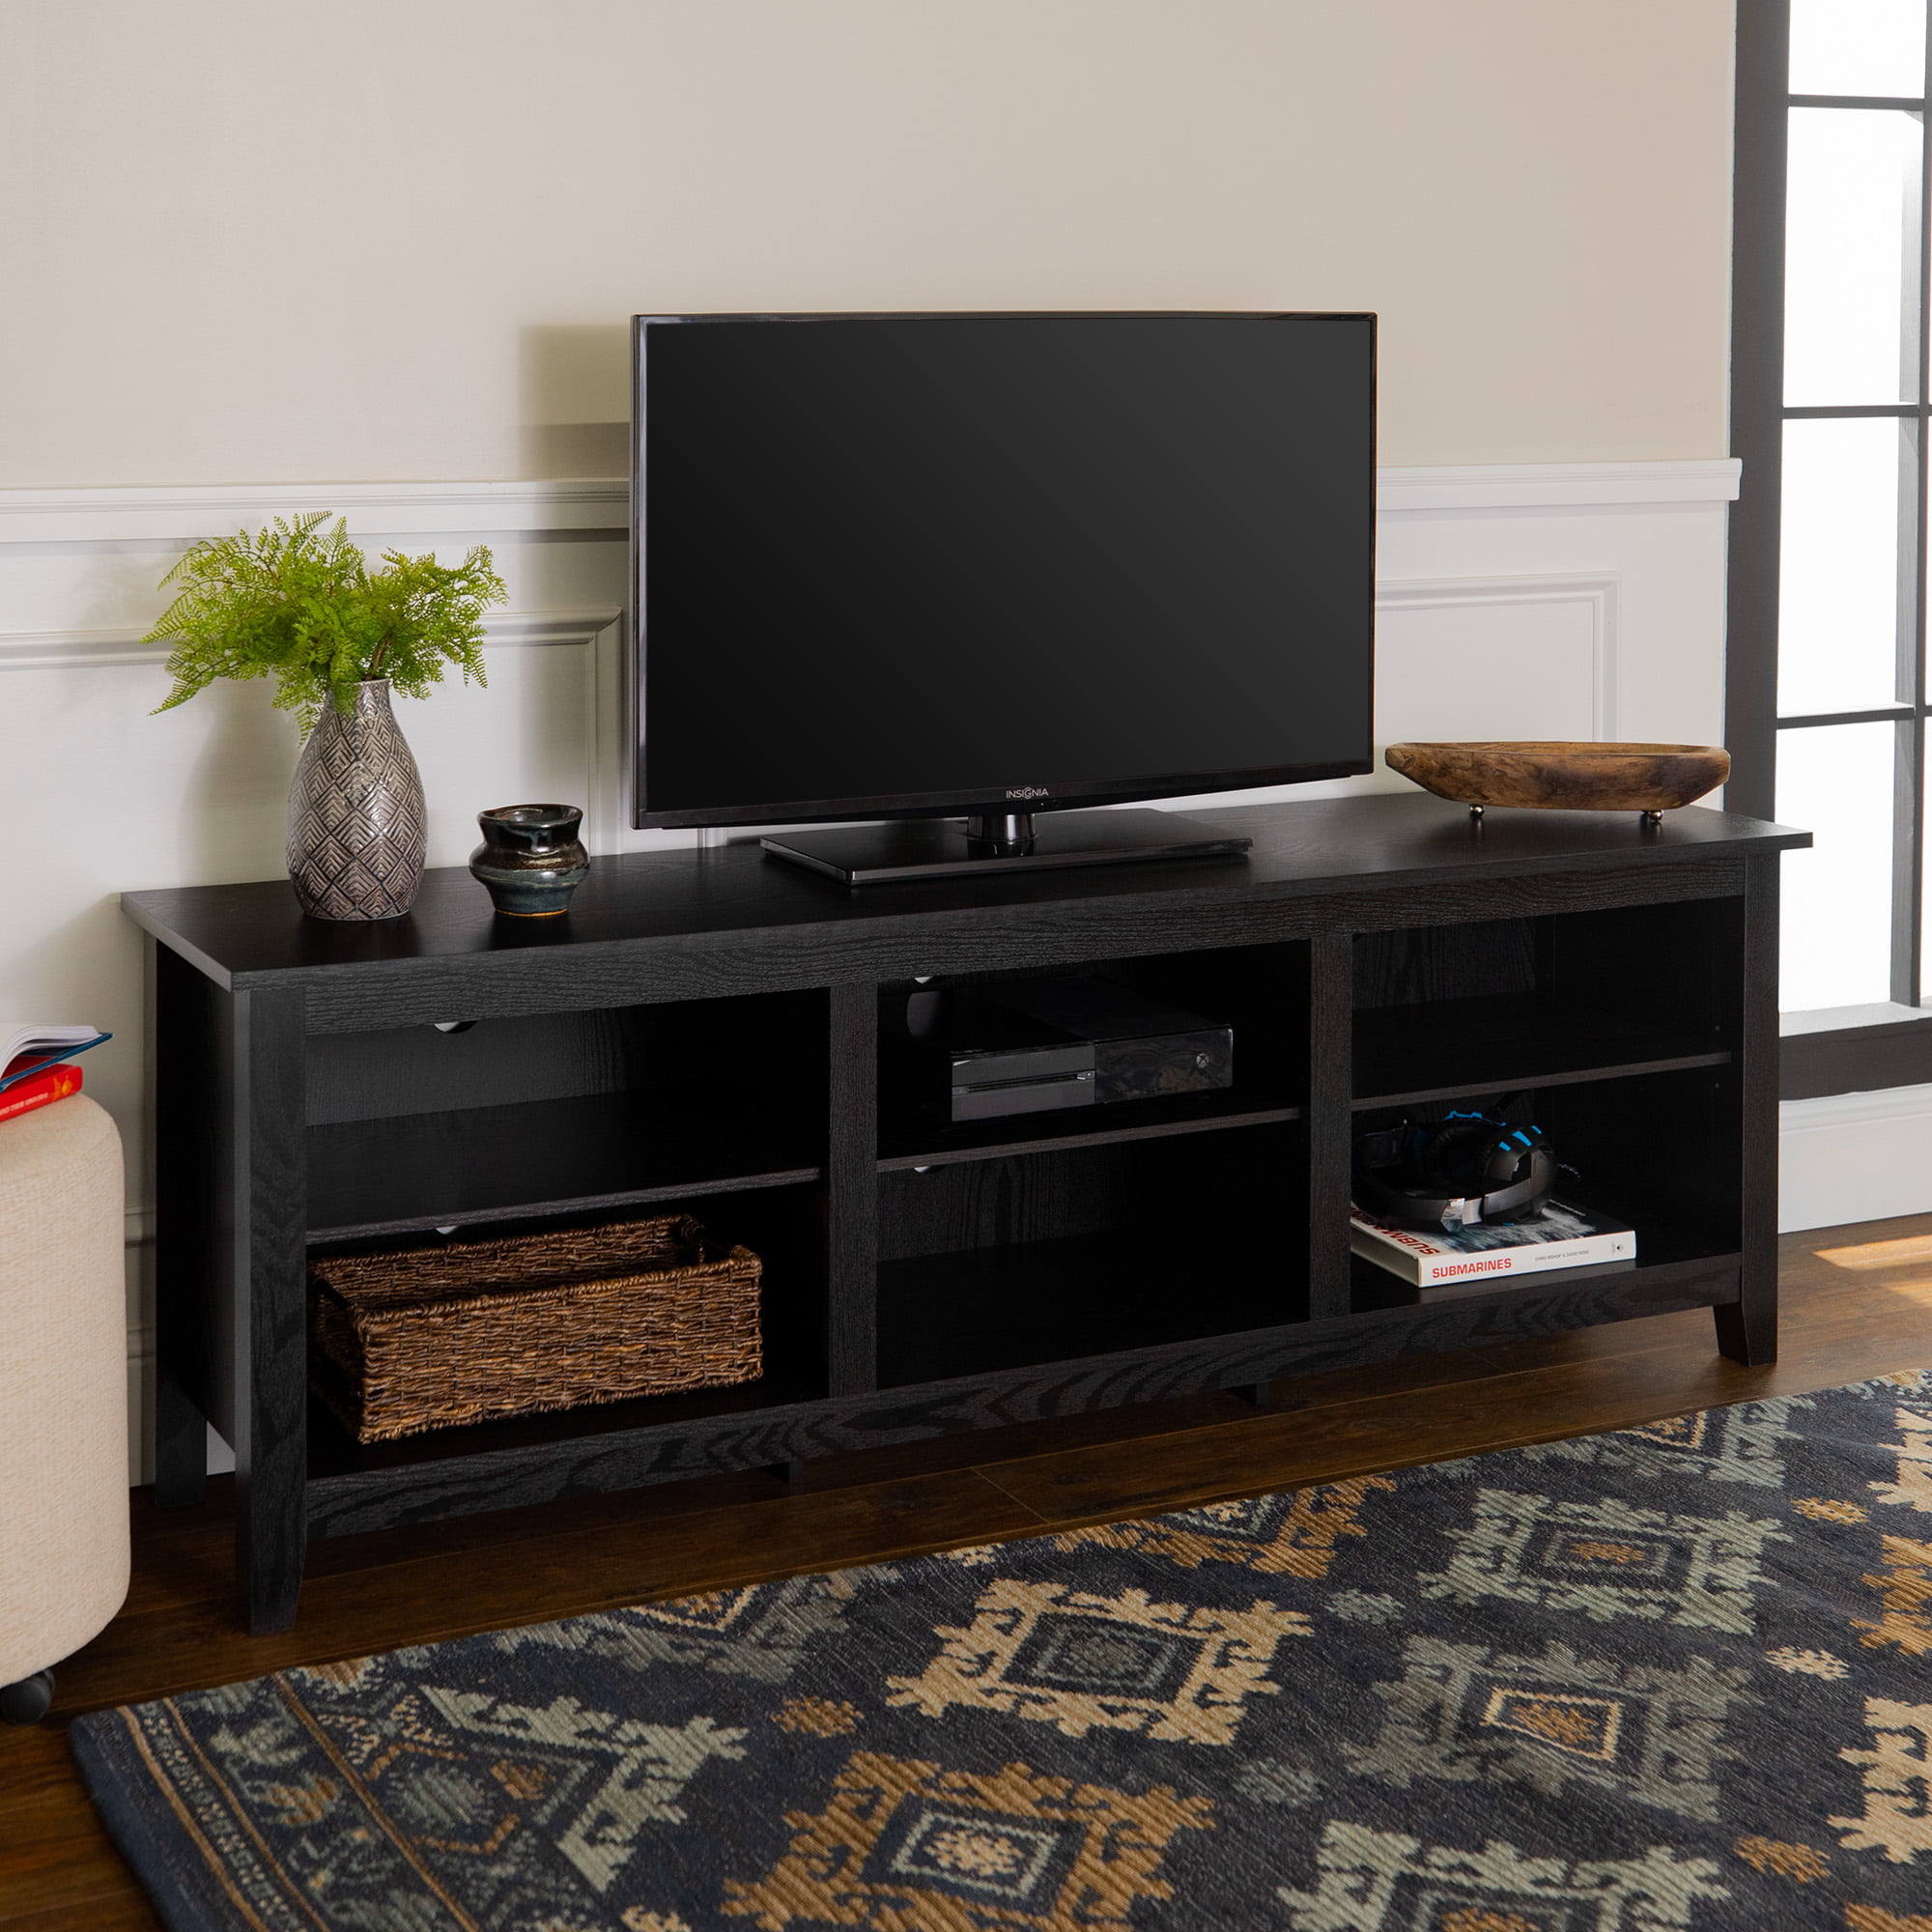 Manor Park Wood TV Media Storage Stand for TVs up to 78"